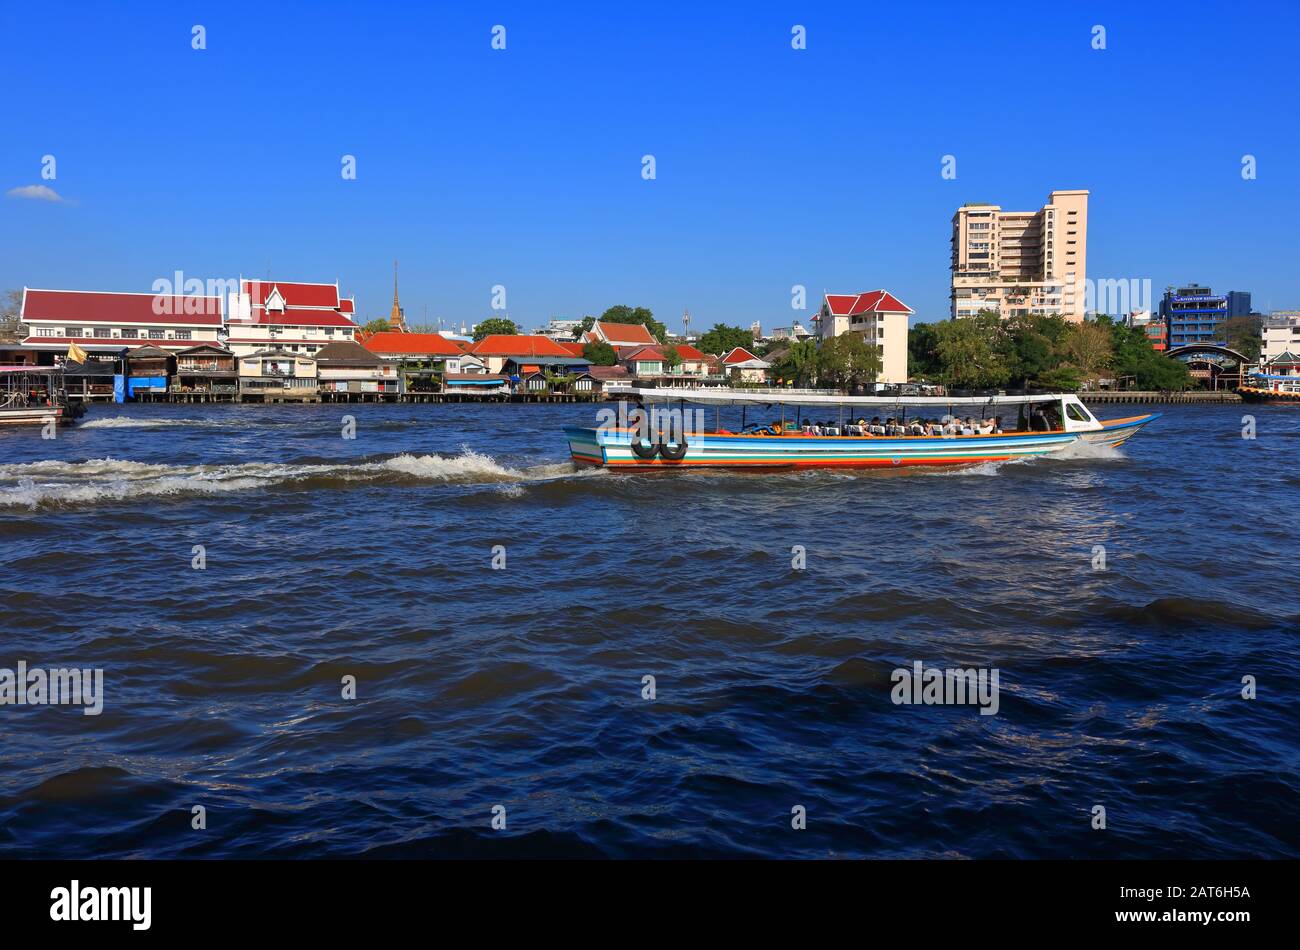 Bangkok, Thailand- January 28 2020: Traveling by boat to visit landmarks along Chao Phraya river is very popular for tourists Stock Photo